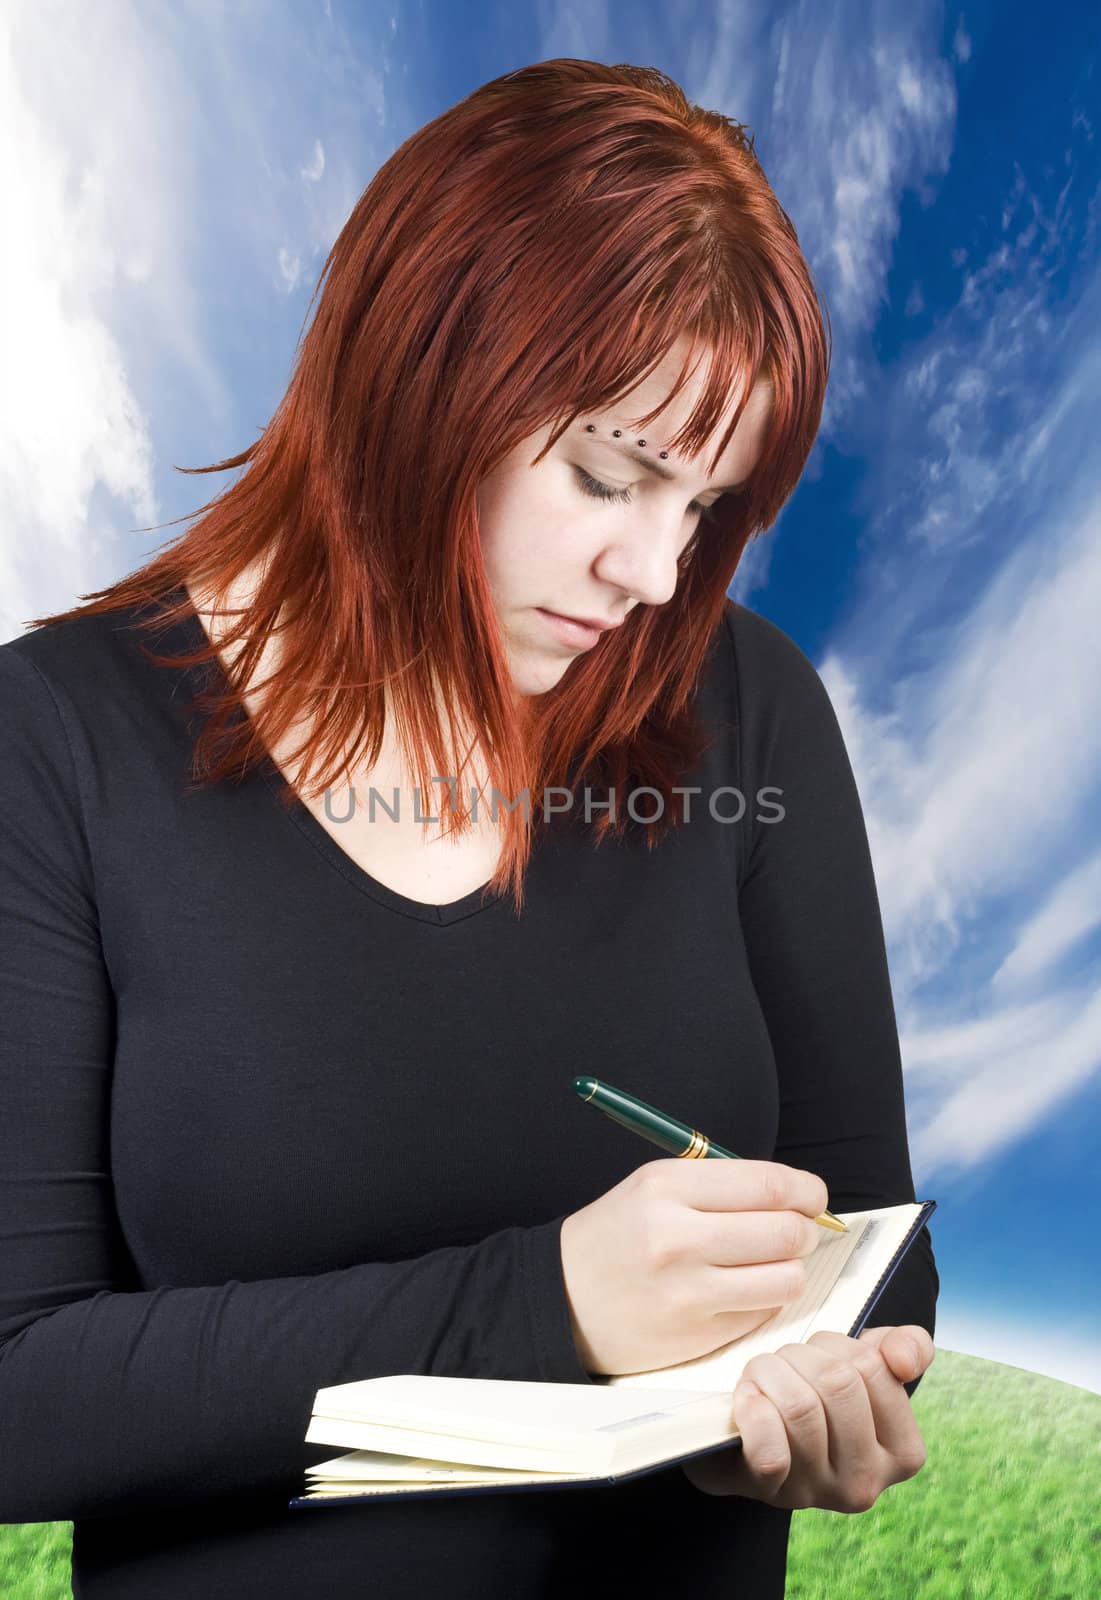 Cute girl with red hair writing in her diary or notebook with blank pages.